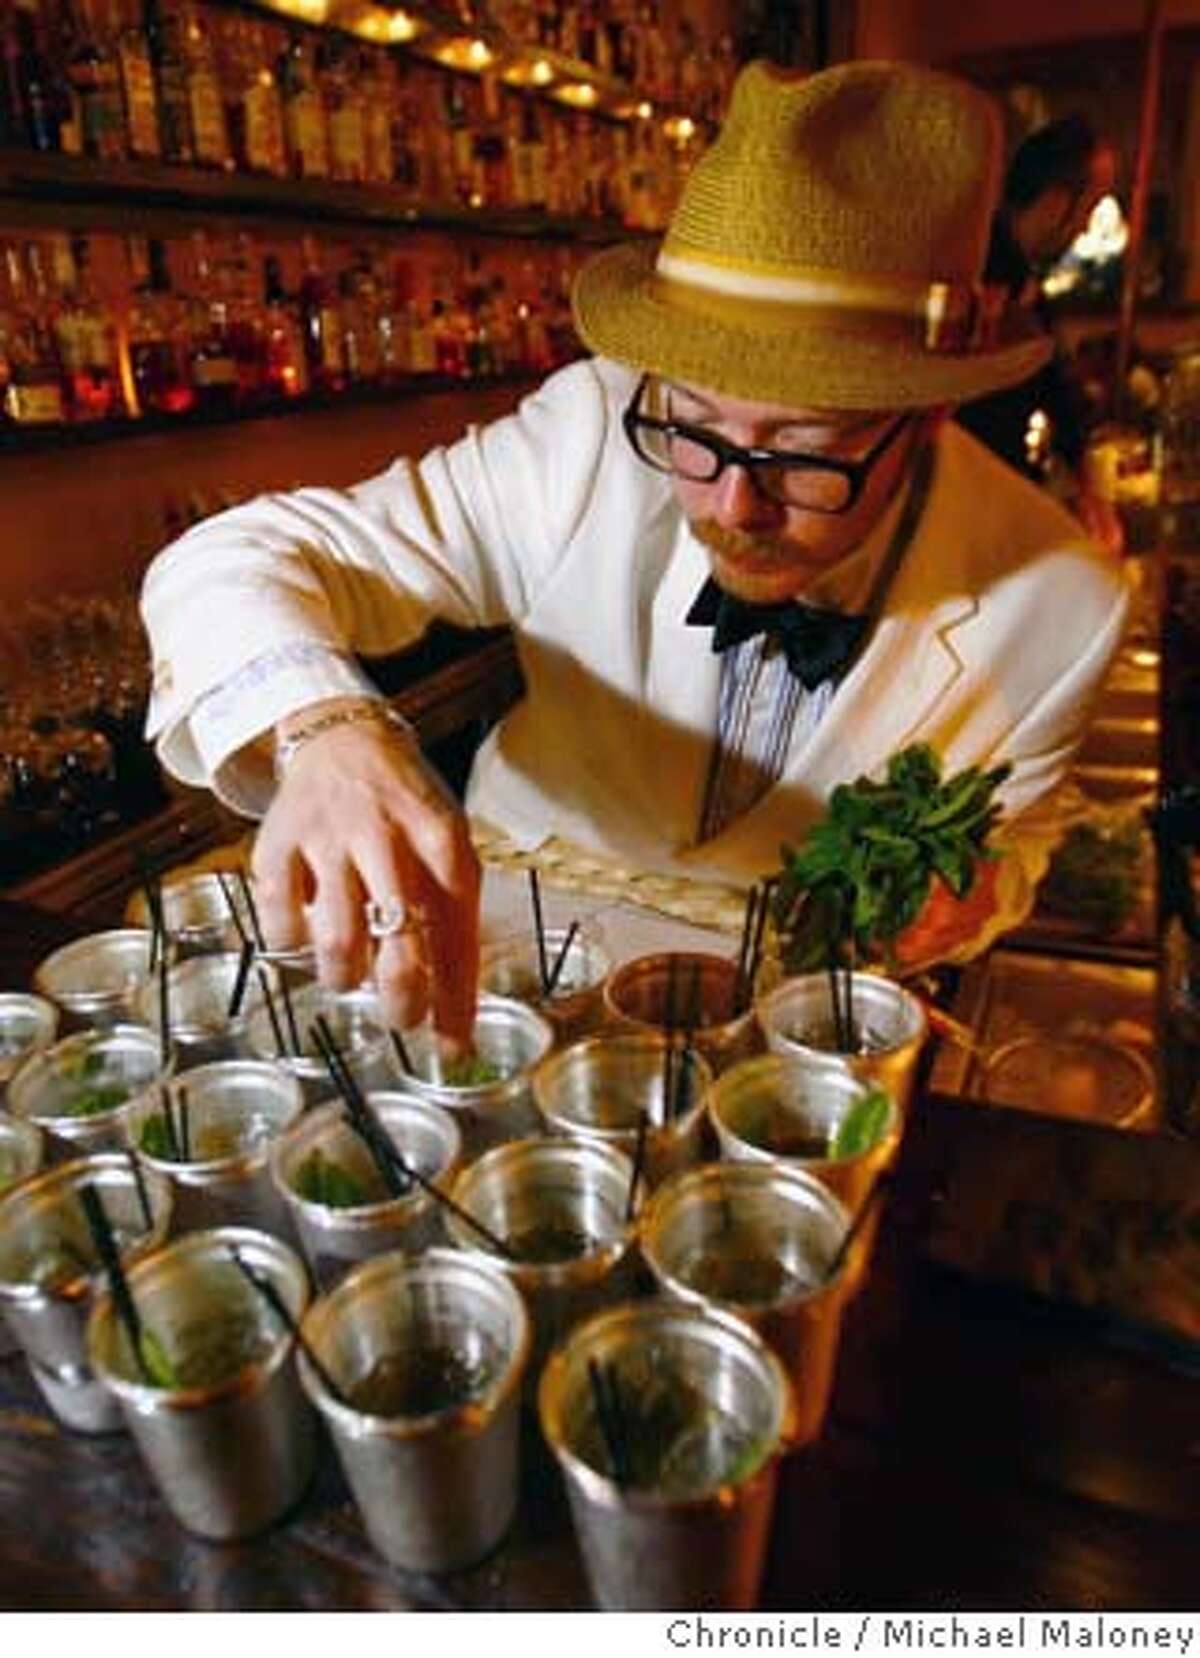 Daniel Hyatt, bar manager at Alembic (1725 Haight) puts the finishing touches (mint leaves) on the mint julip cocktails. Several of San Francisco�s top mixologists have organized a week-long celebration (called the San Francisco Cocktail Week)of San Francisco�s vibrant cocktail scene that culminates on Monday, May 21st at Absinthe Brasserie & Bar. On Monday, May 14, 2007, participants (mostly journalists and bar owners and workers) boarded a bus that transported them to a half dozen participating bars where they could sample two unique cocktails at each bar. Photo taken on 5/14/07 in San Francisco, CA. Photo by Michael Maloney / San Francisco Chronicle *** Daniel Hyatt Ran on: 05-18-2007 Co-owner Aaron Prentice, left, mixes up a pisco punch at Cantina, a bar that opened earlier this week. Above, Alembic bar manager Daniel Hyatt lines up mint juleps.